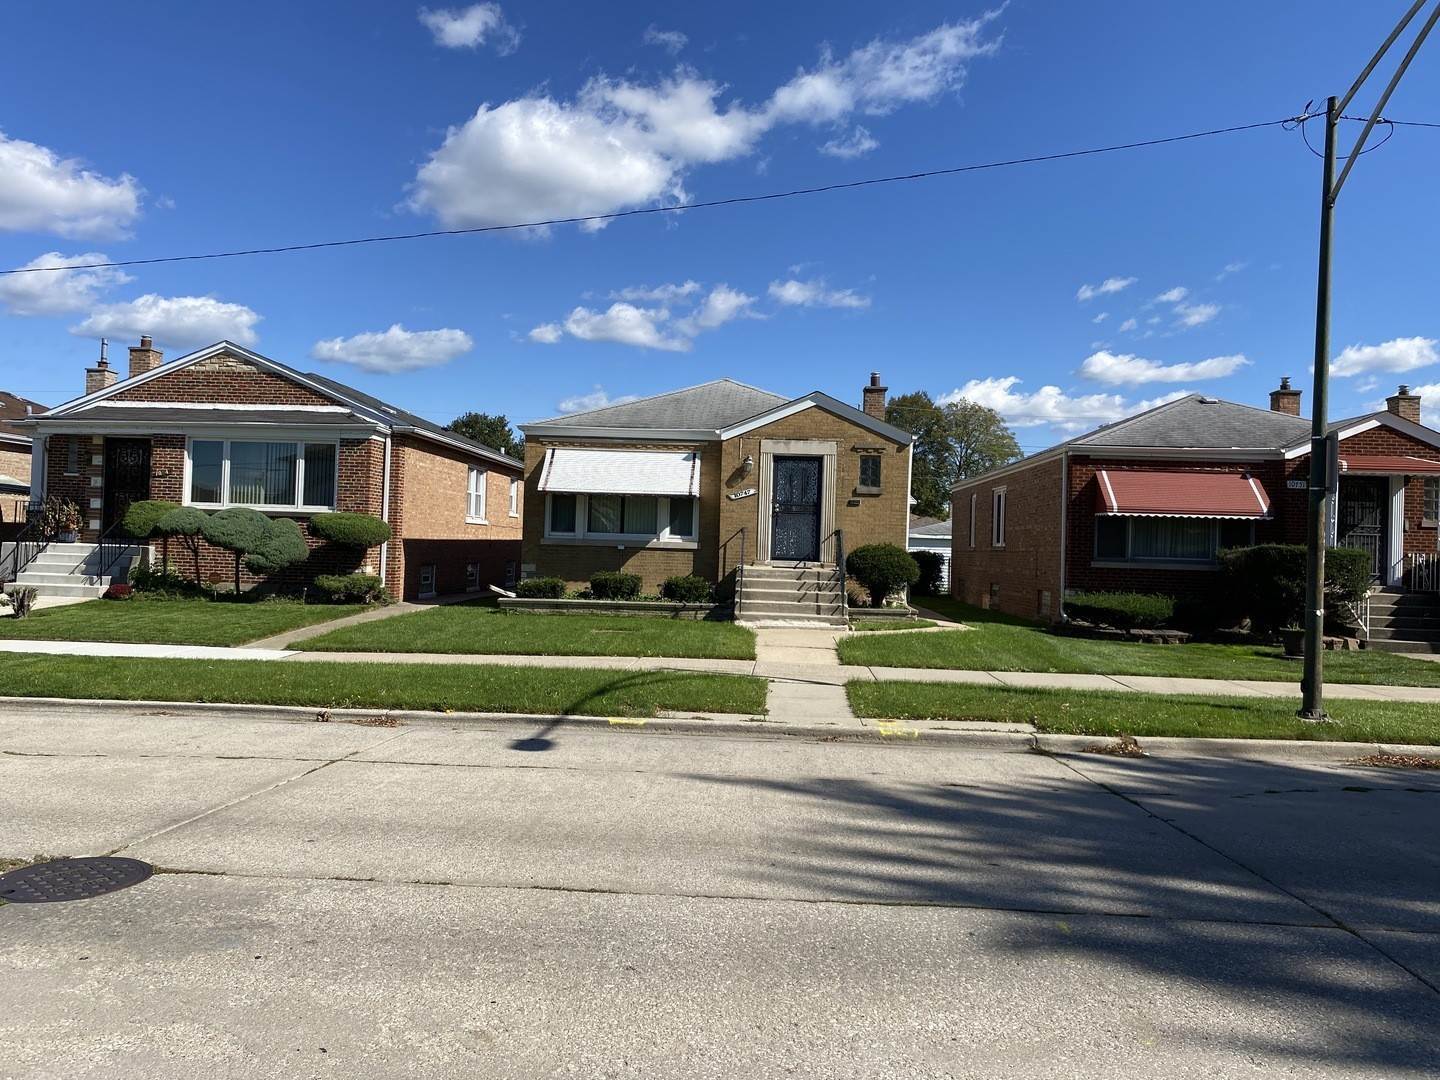 2. Single Family for Sale at Roseland, Chicago, IL 60628